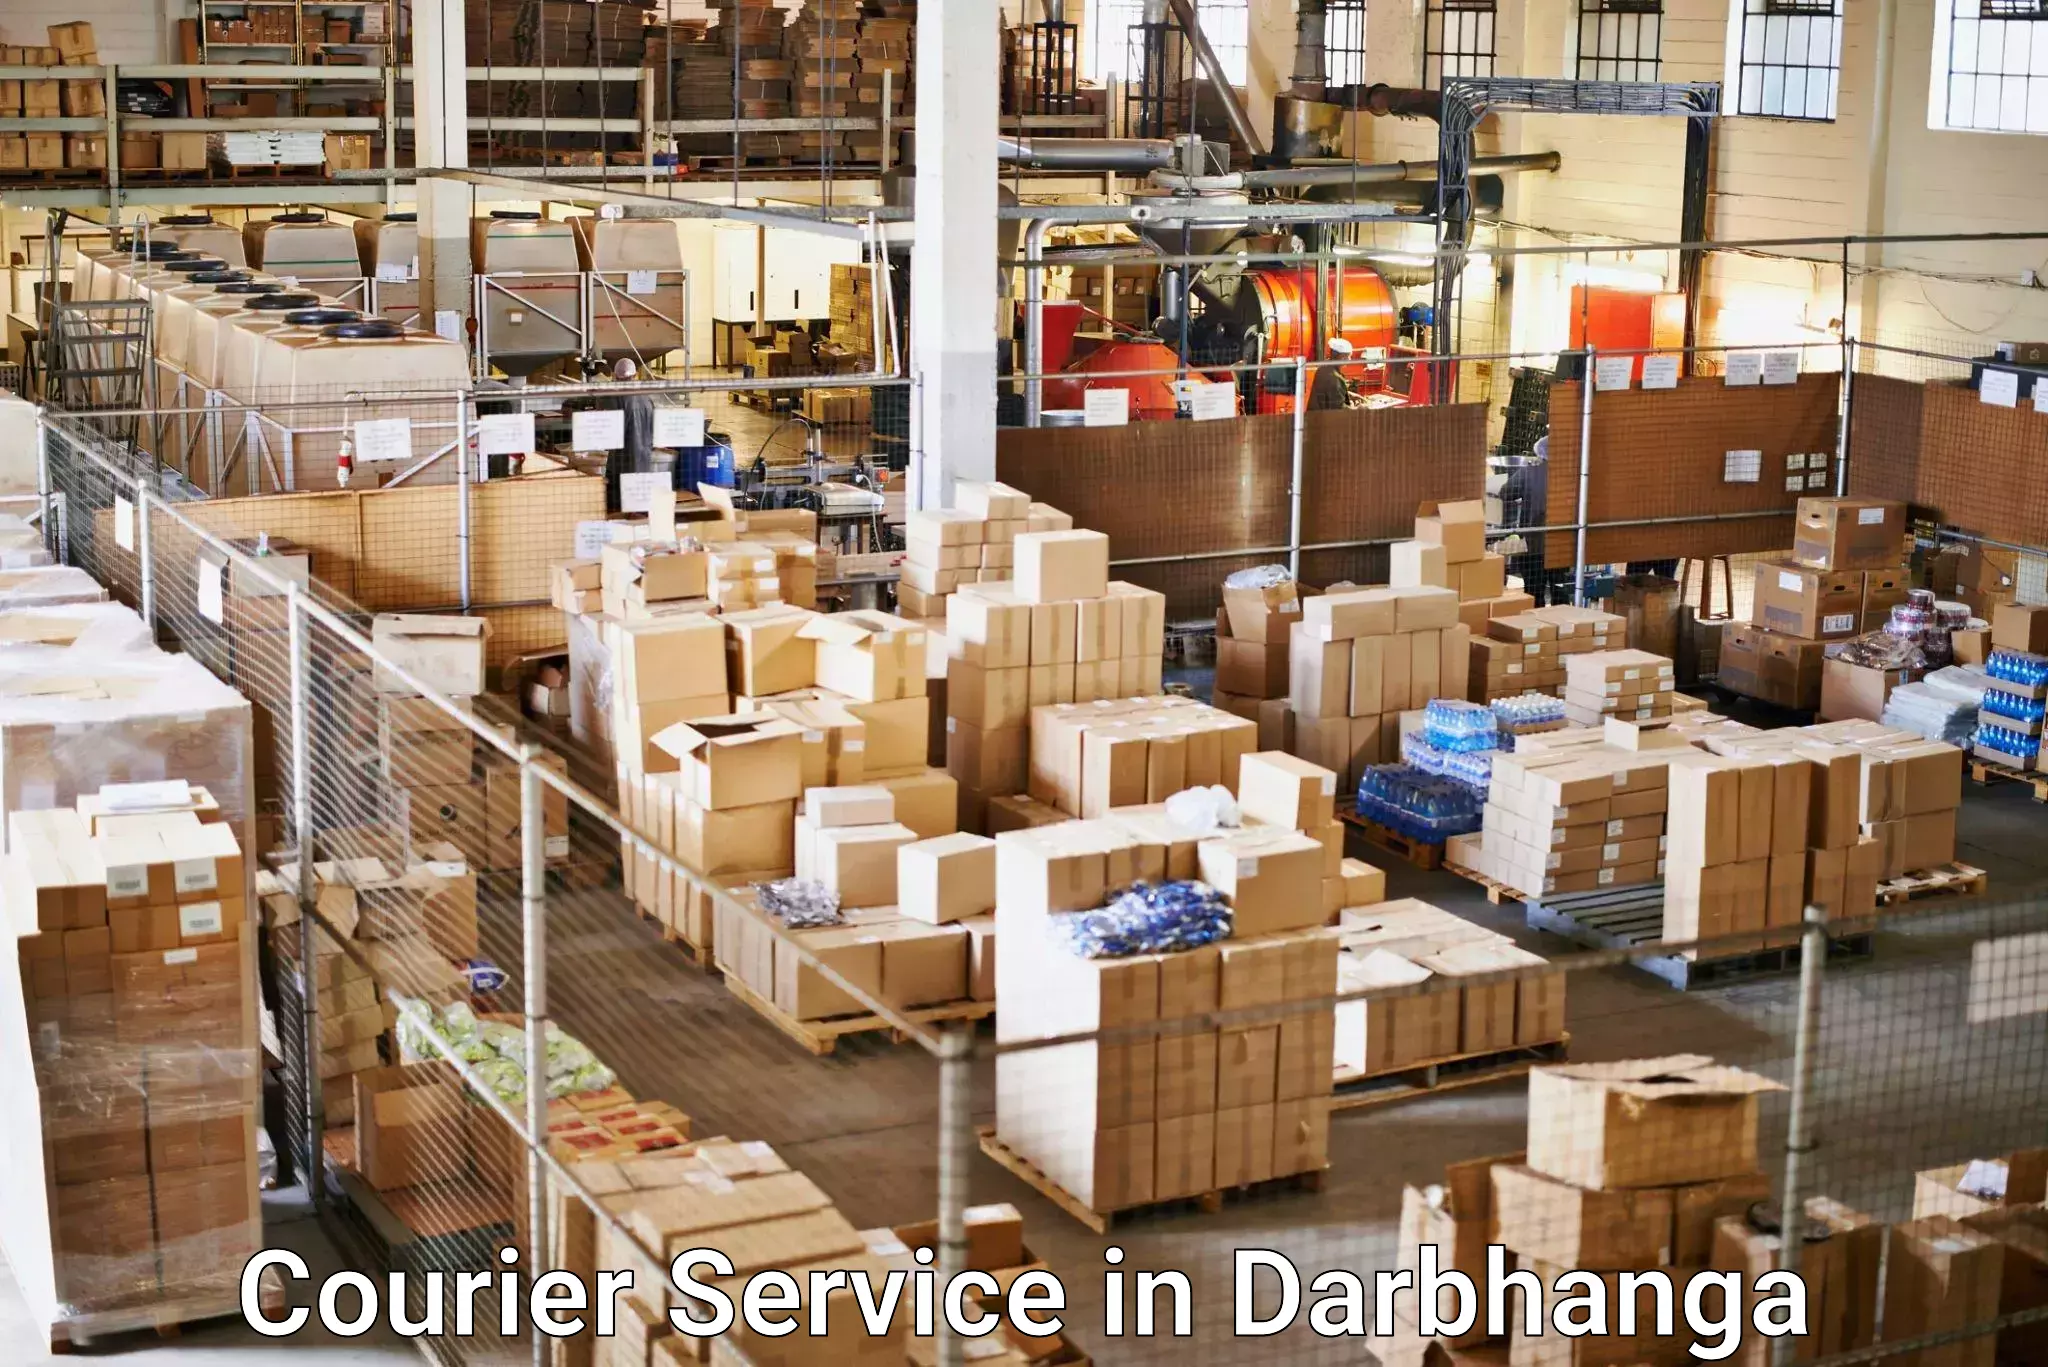 Tailored delivery services in Darbhanga